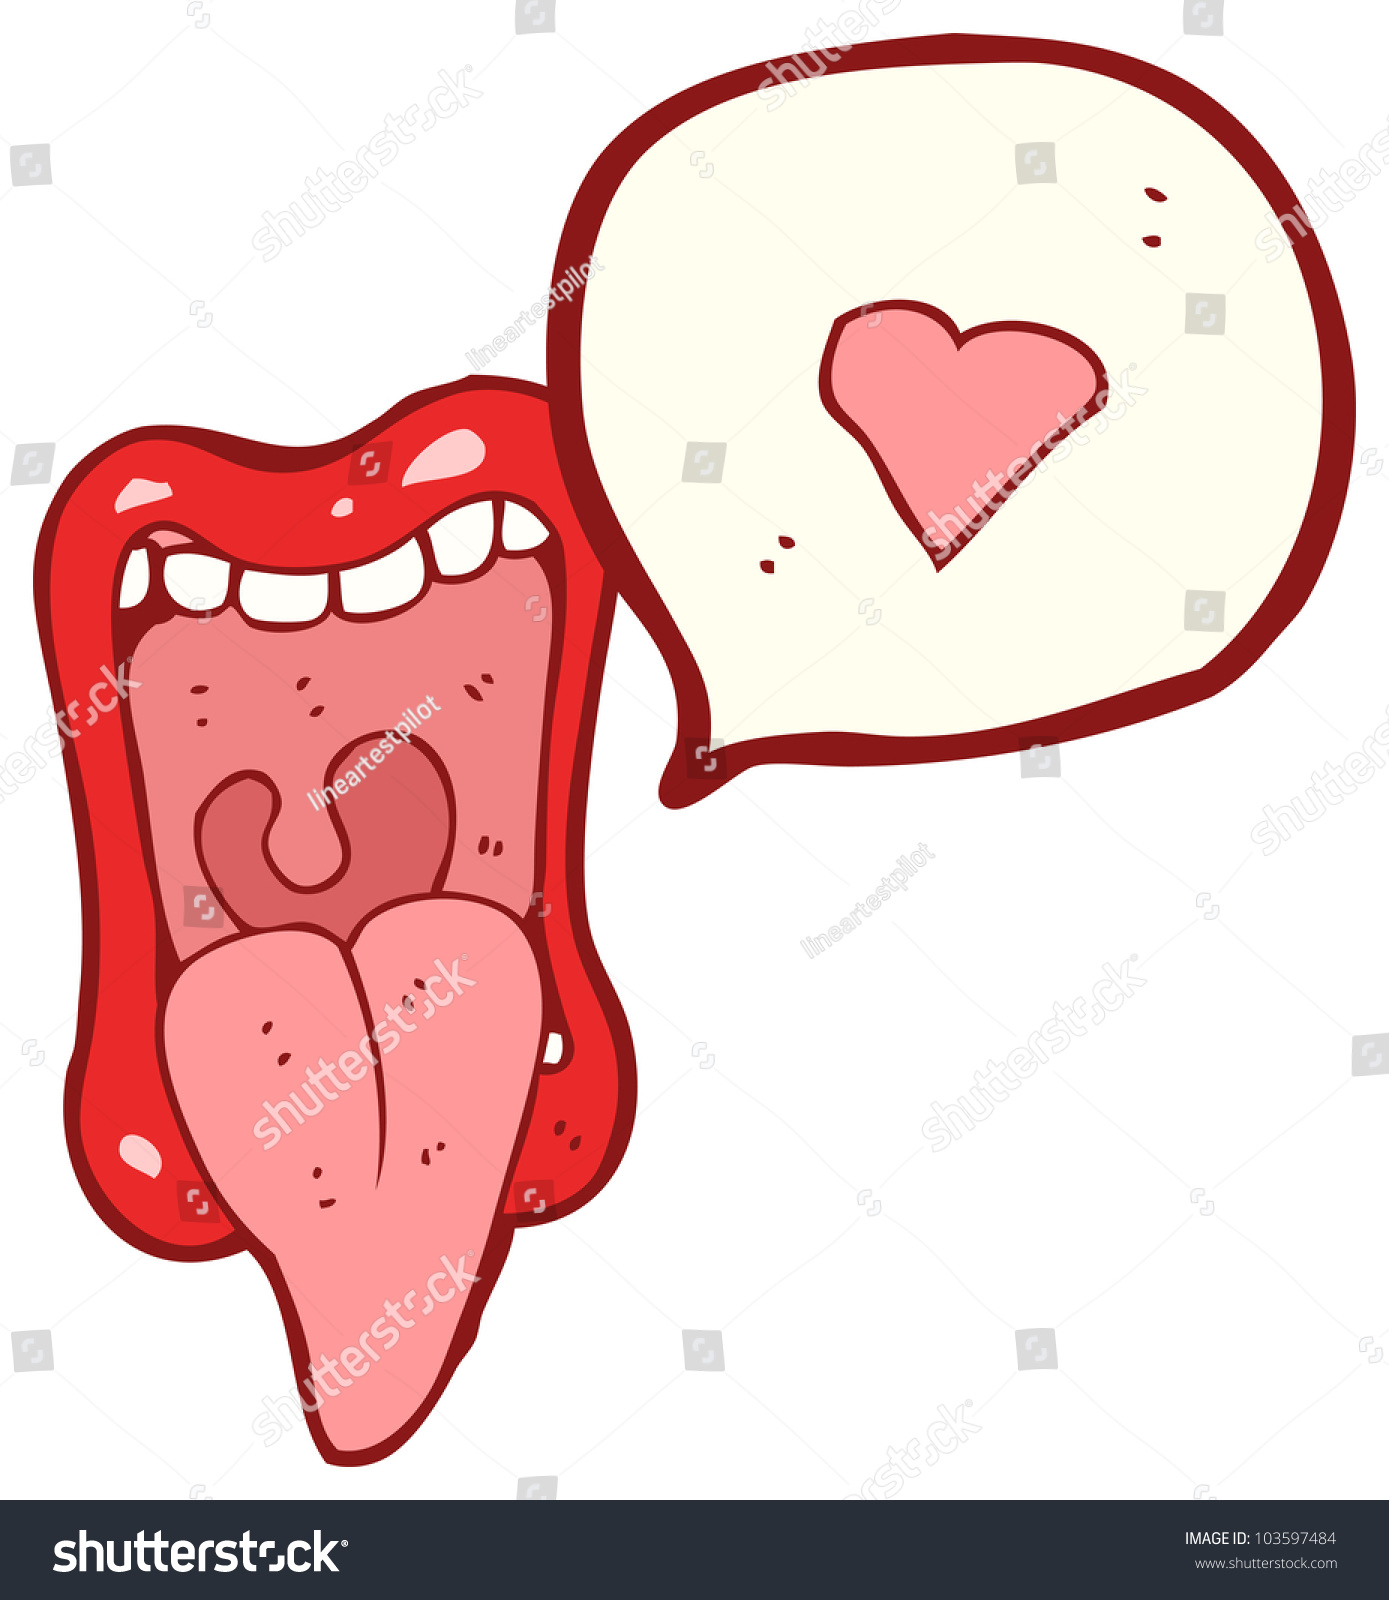 Cartoon Shouting Mouth With Love Heart Stock Photo 103597484 : Shutterstock